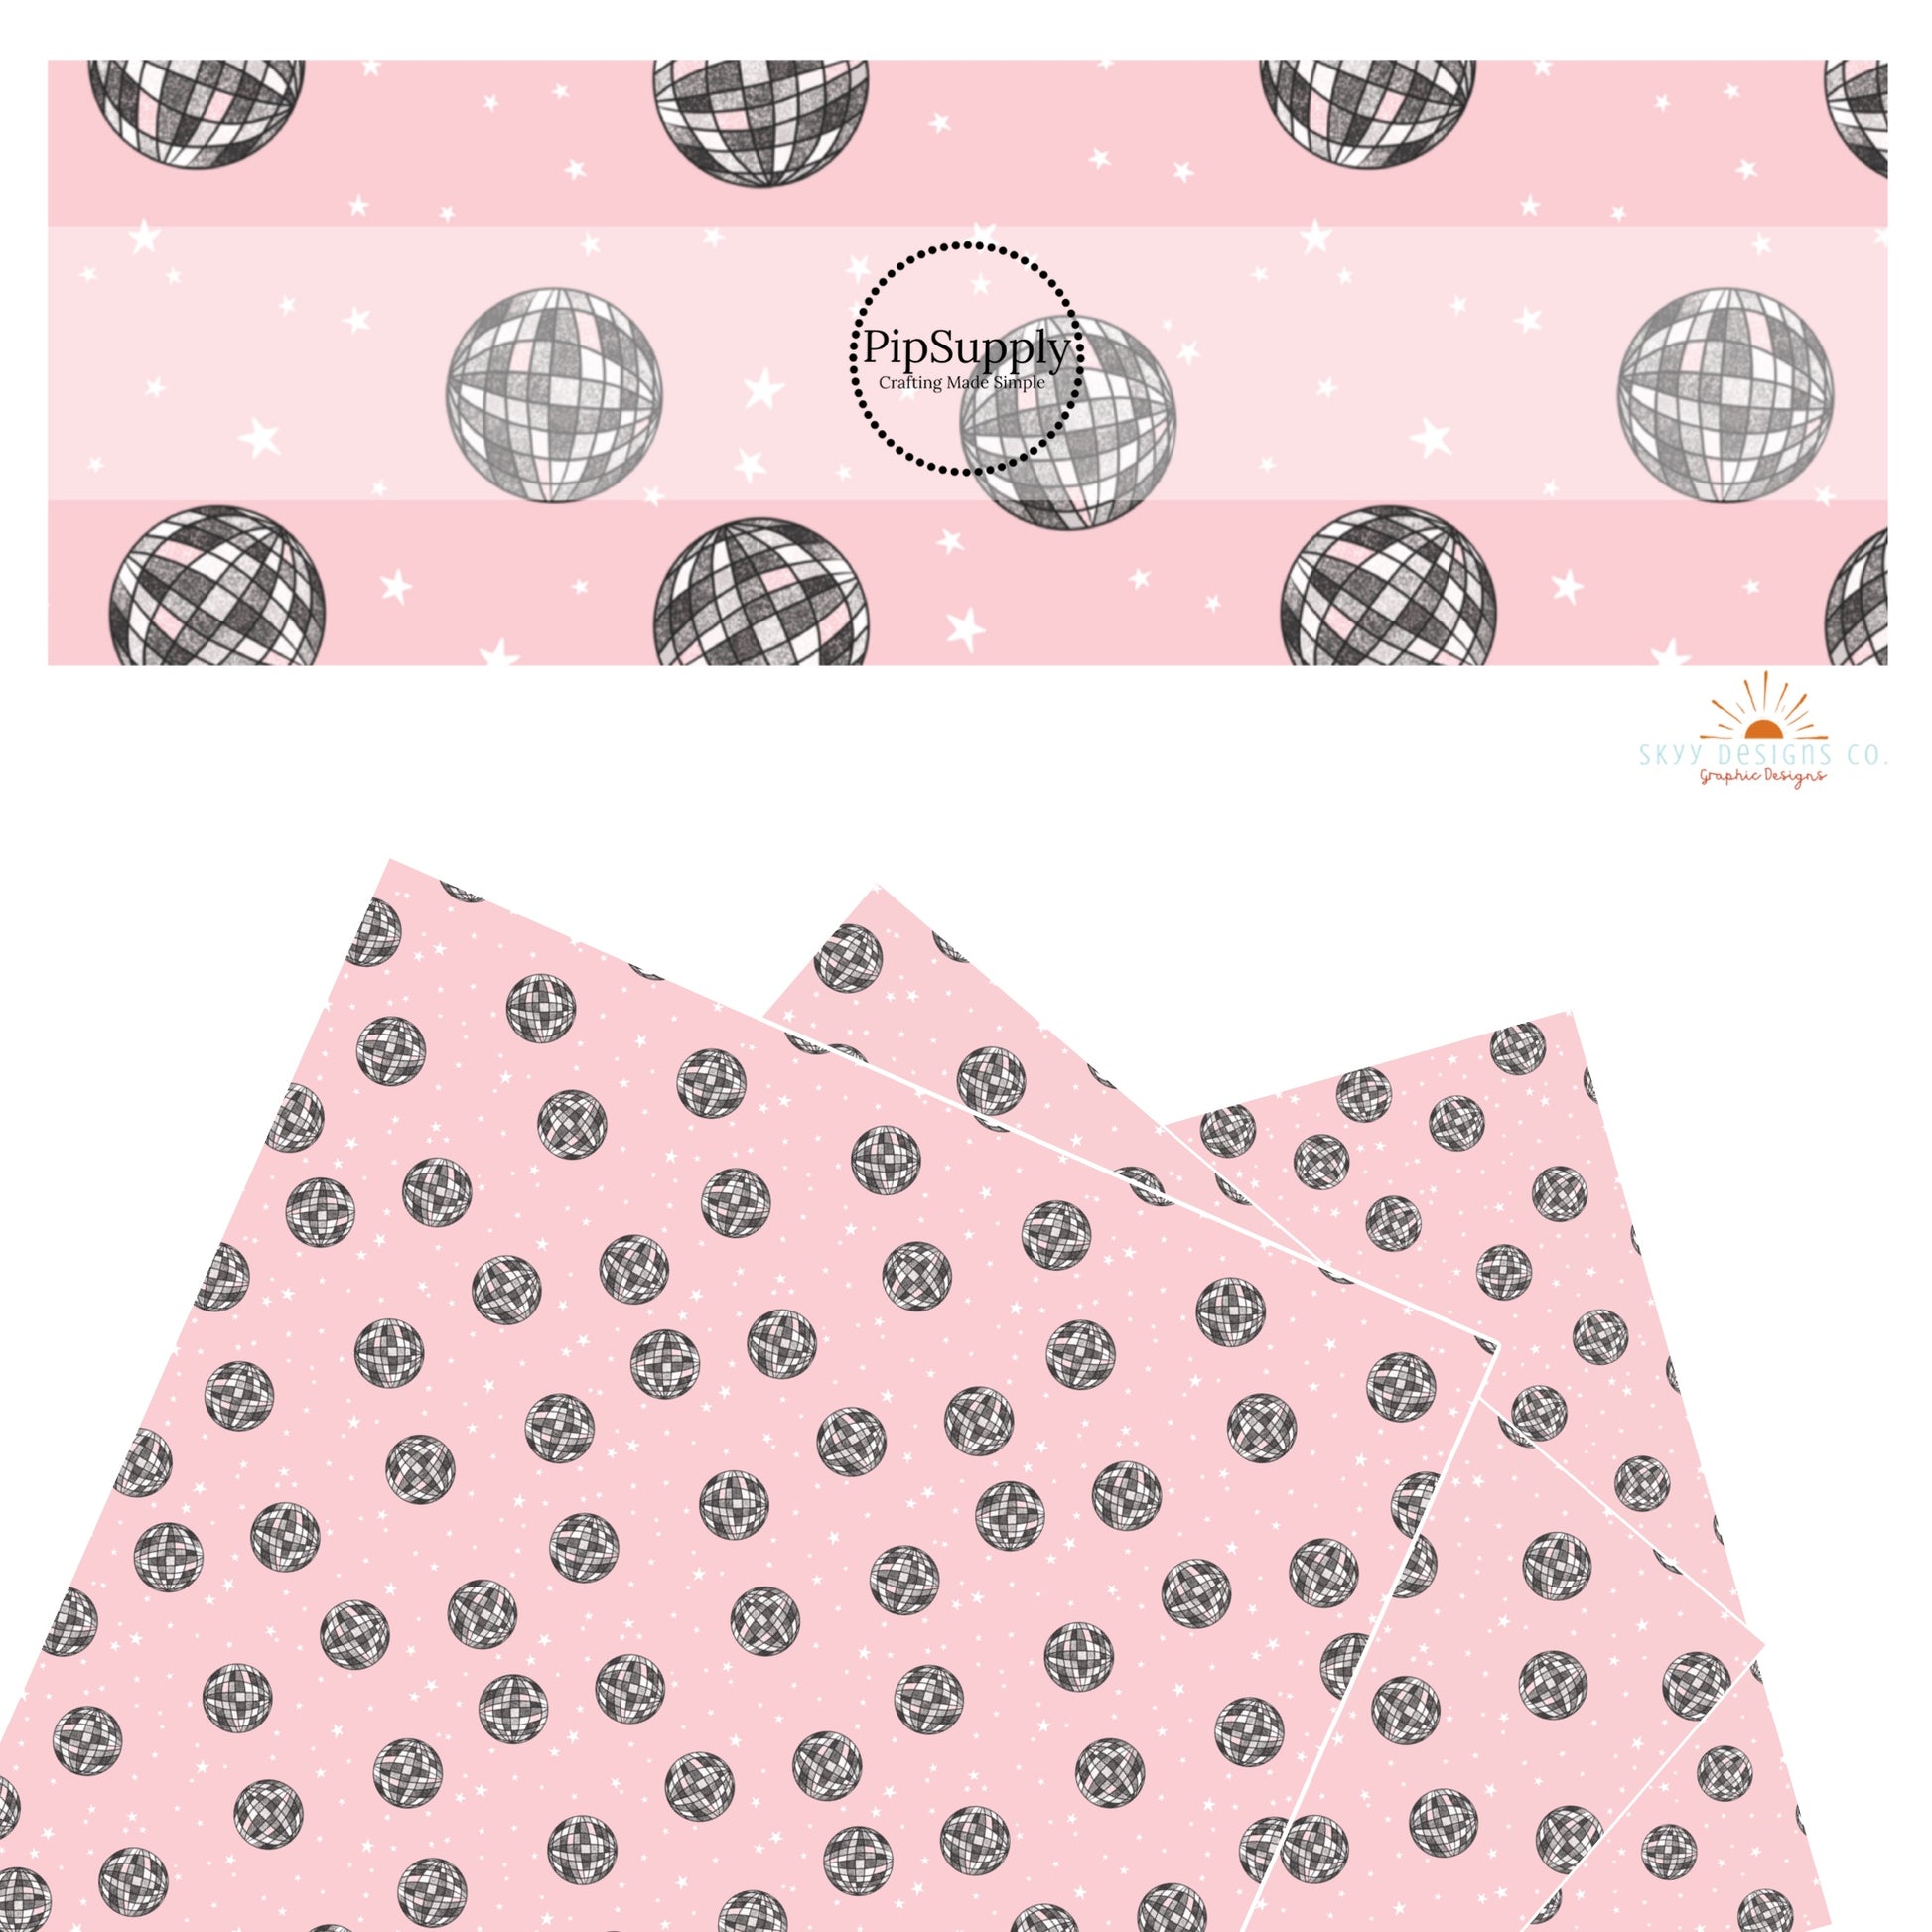 White stars and disco balls on pink faux leather sheets